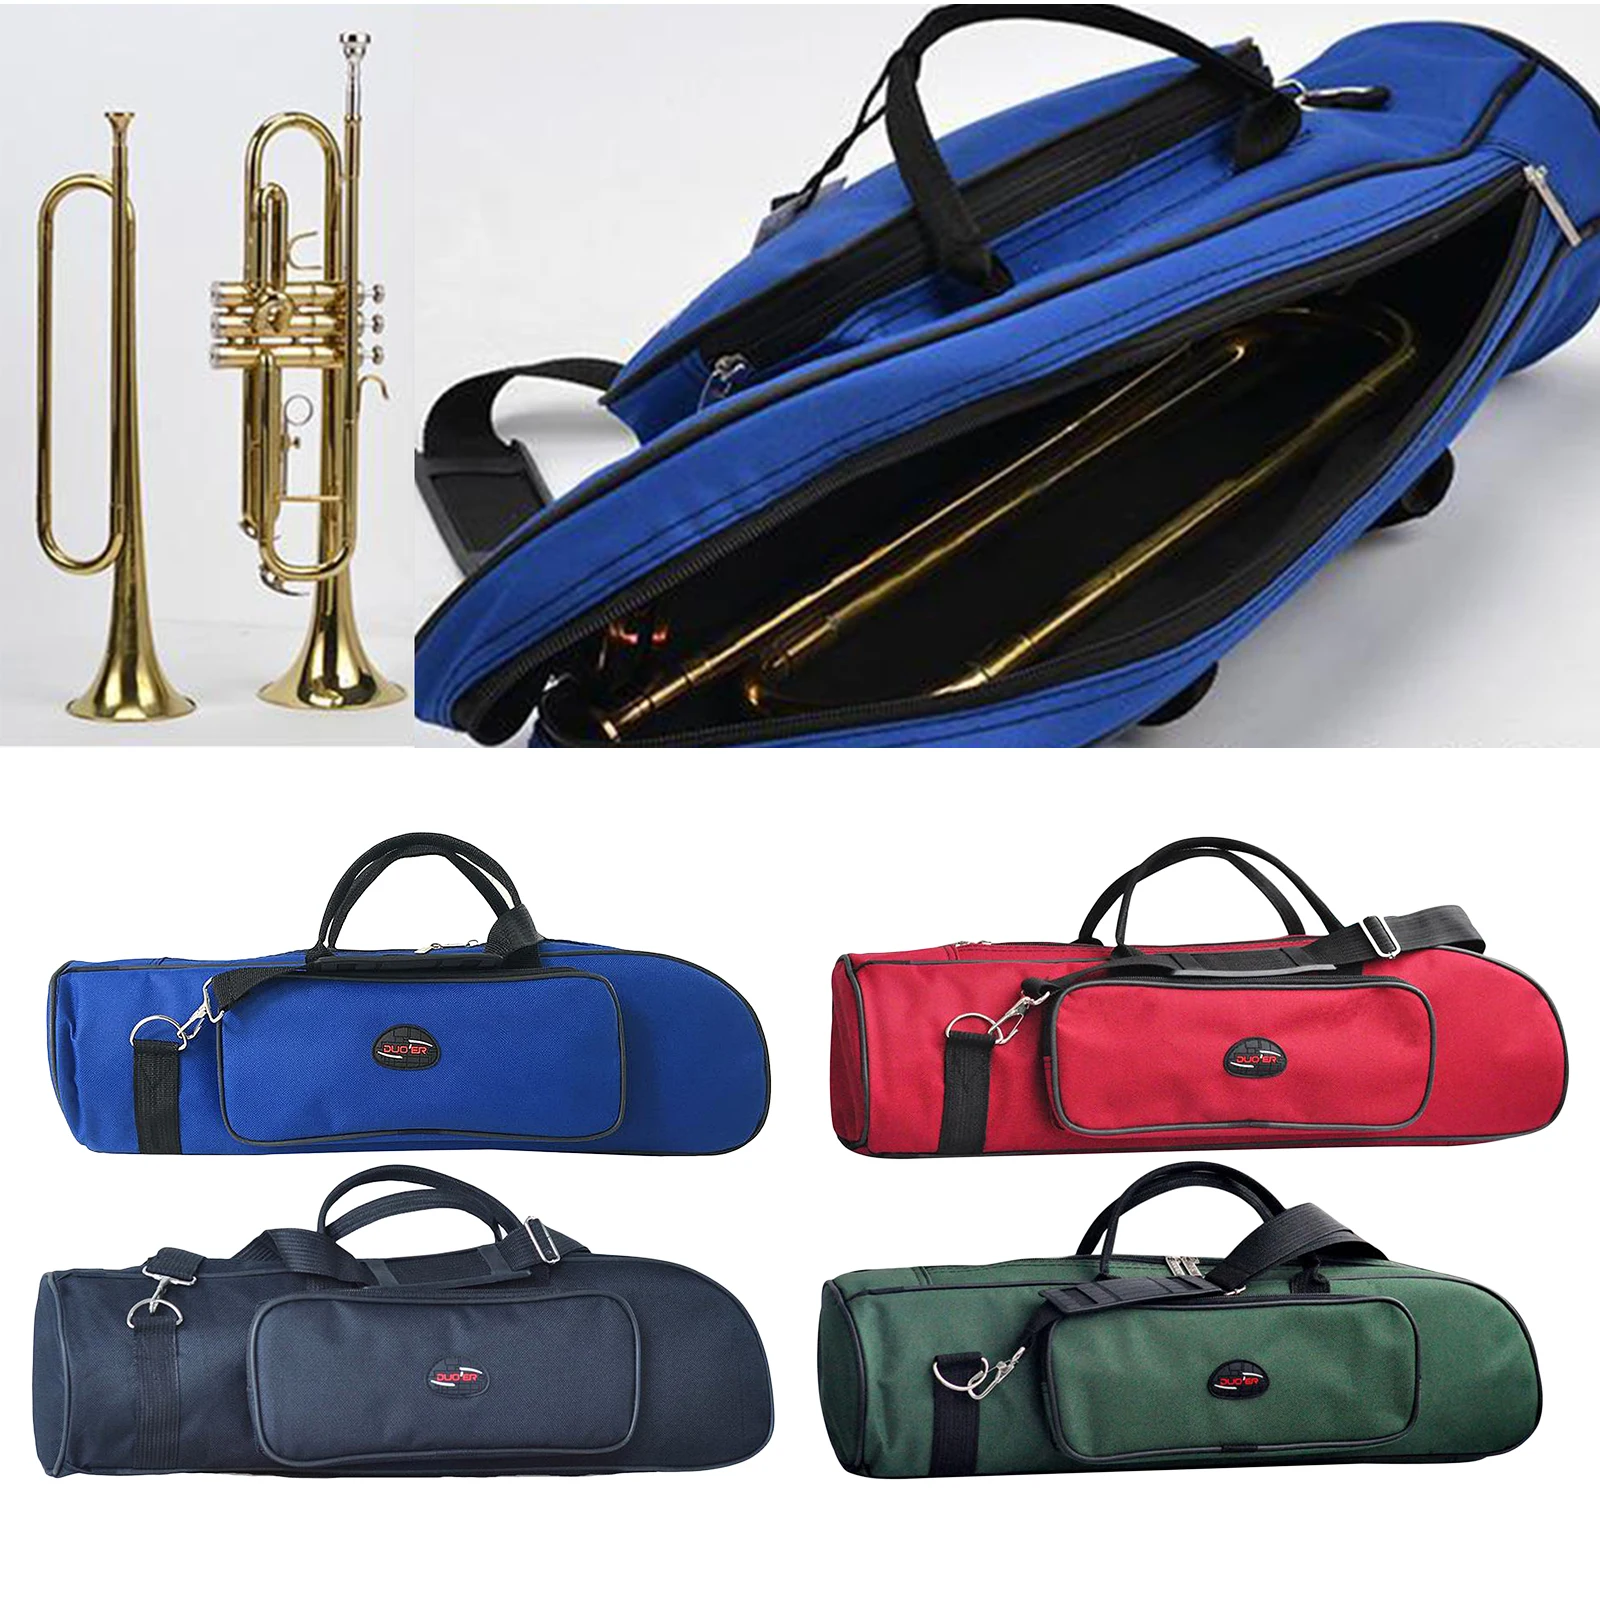 Portable Trumpet Bag Waterproof Oxford Carrying Handle Bags Zipper Case Box Musical Instrument Accessories with Front Pocket